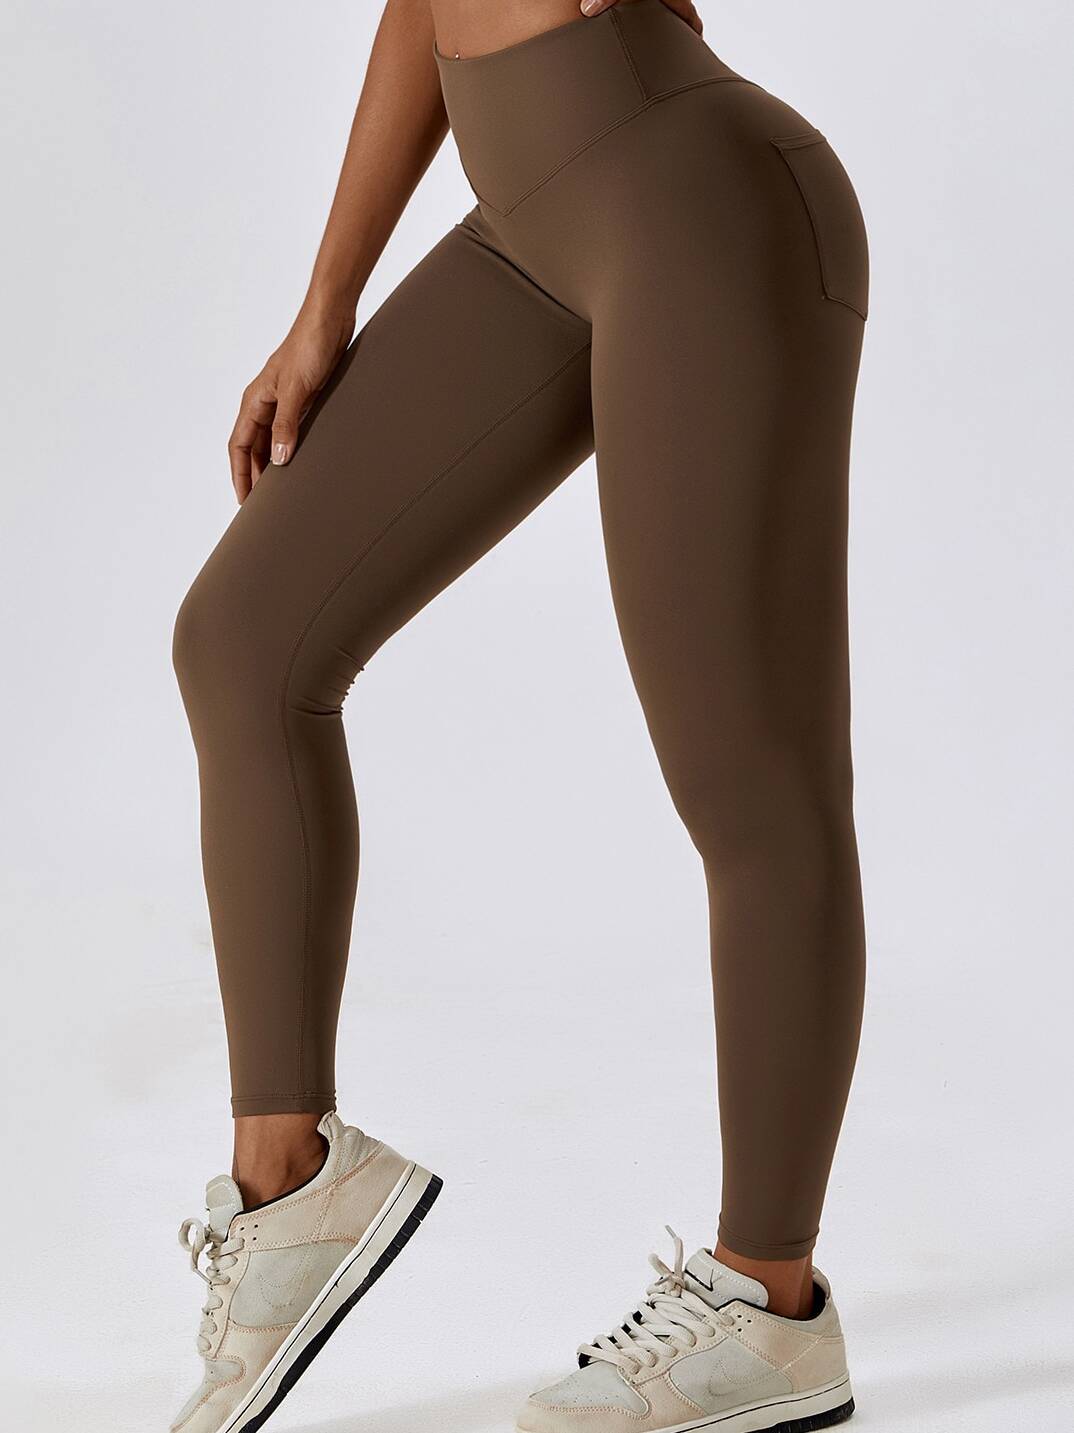 Enhance Your Curves with These Amazing Leggings